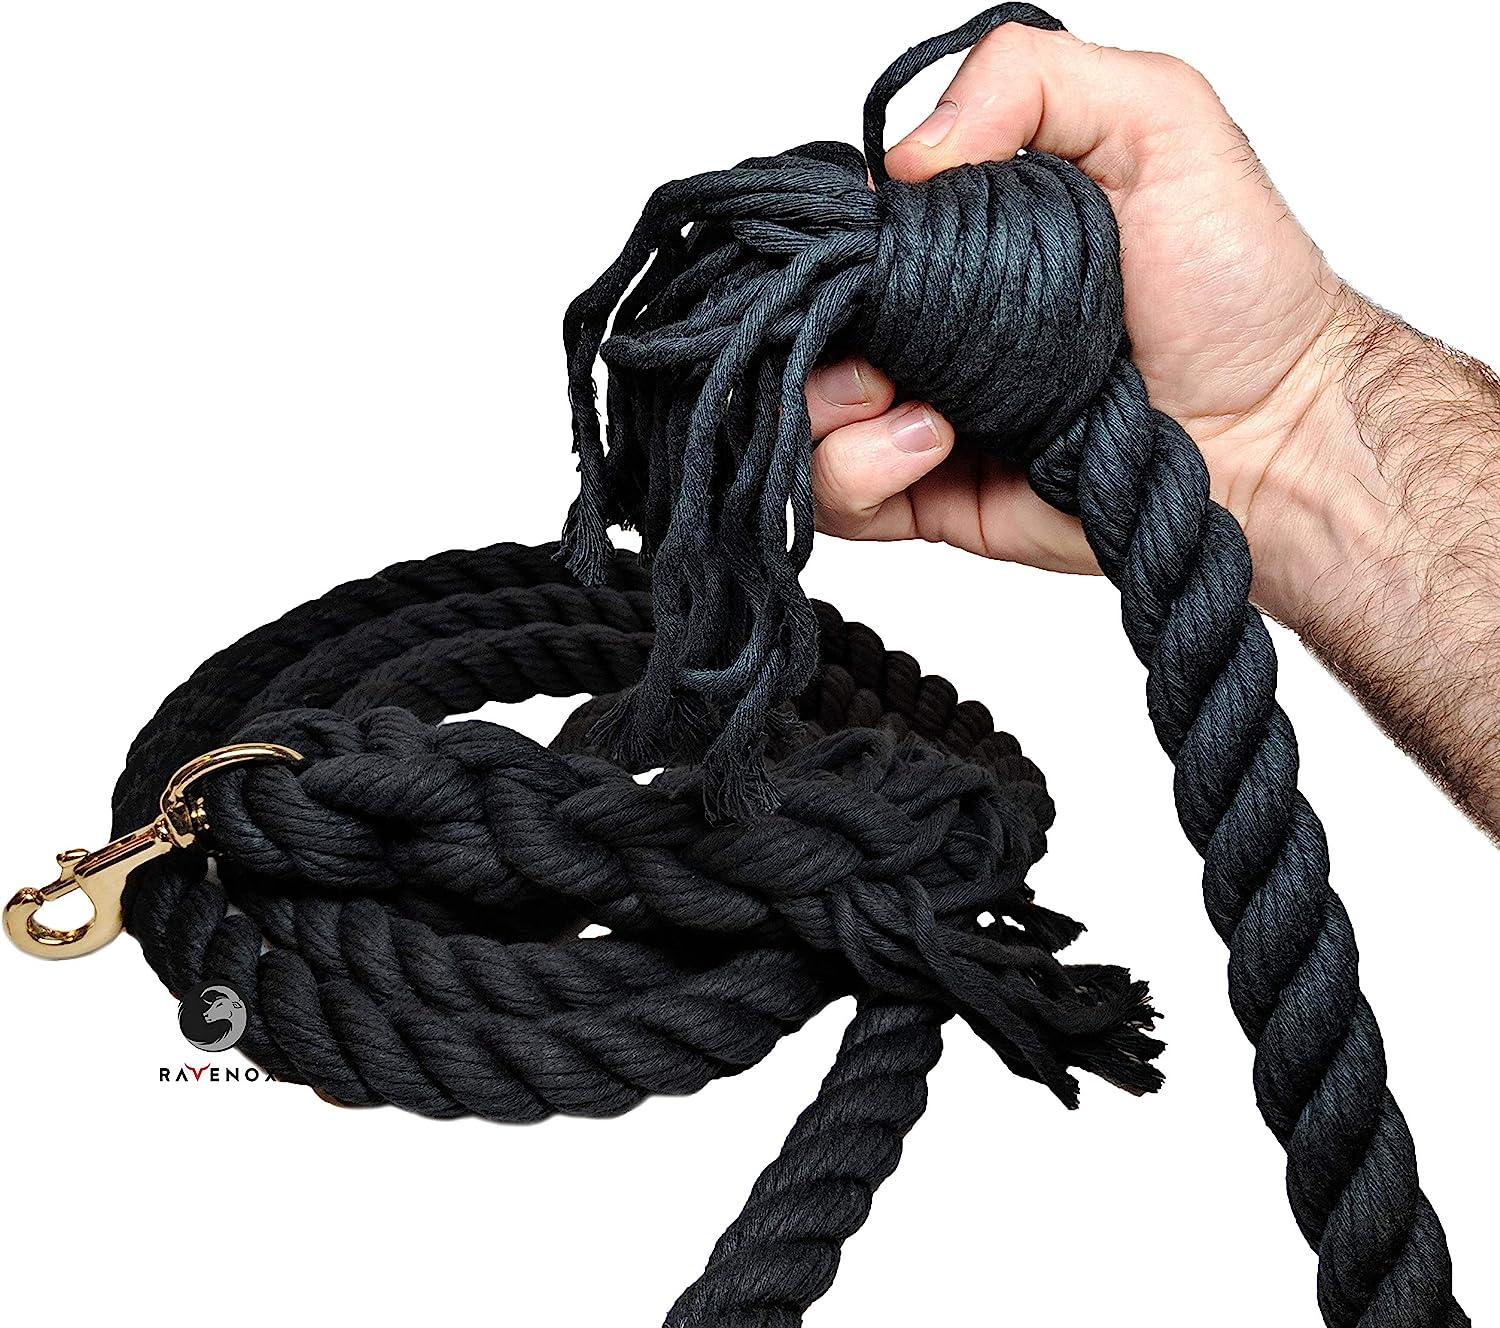 Fms Ravenox Cotton Rope Horse Lead, (1-inch x 8-feet), Handmade with Twisted  Cotton Rope in Black, Equine Lead Rope with Heavy Duty Snap, Backbraided  Handle, Premium Horse Tack